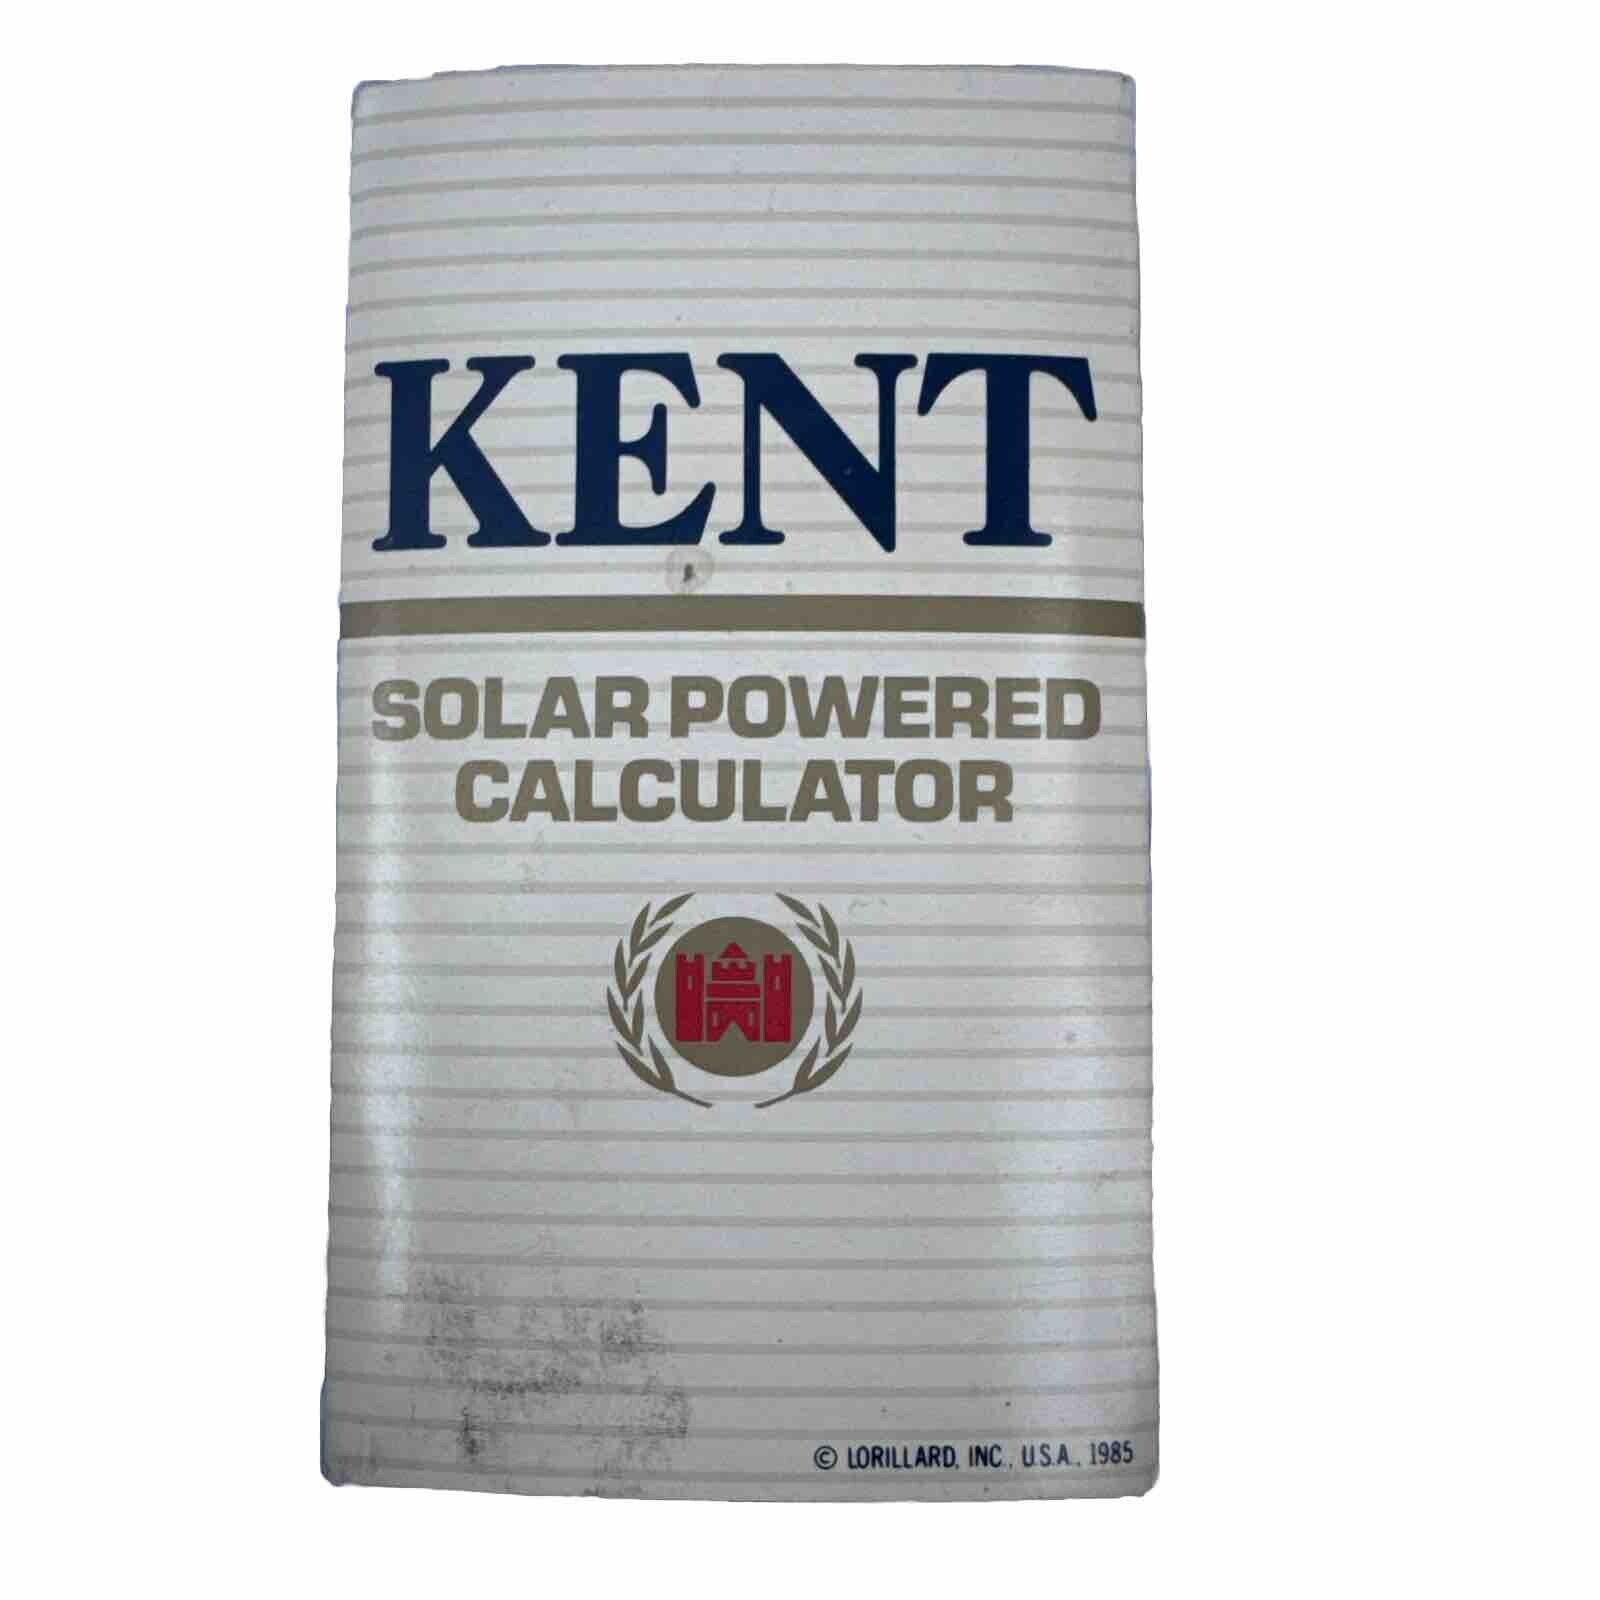 Kent Cigarettes Solar Powered Calculator Vintage Tobacco Promo New Old Stock ‘85